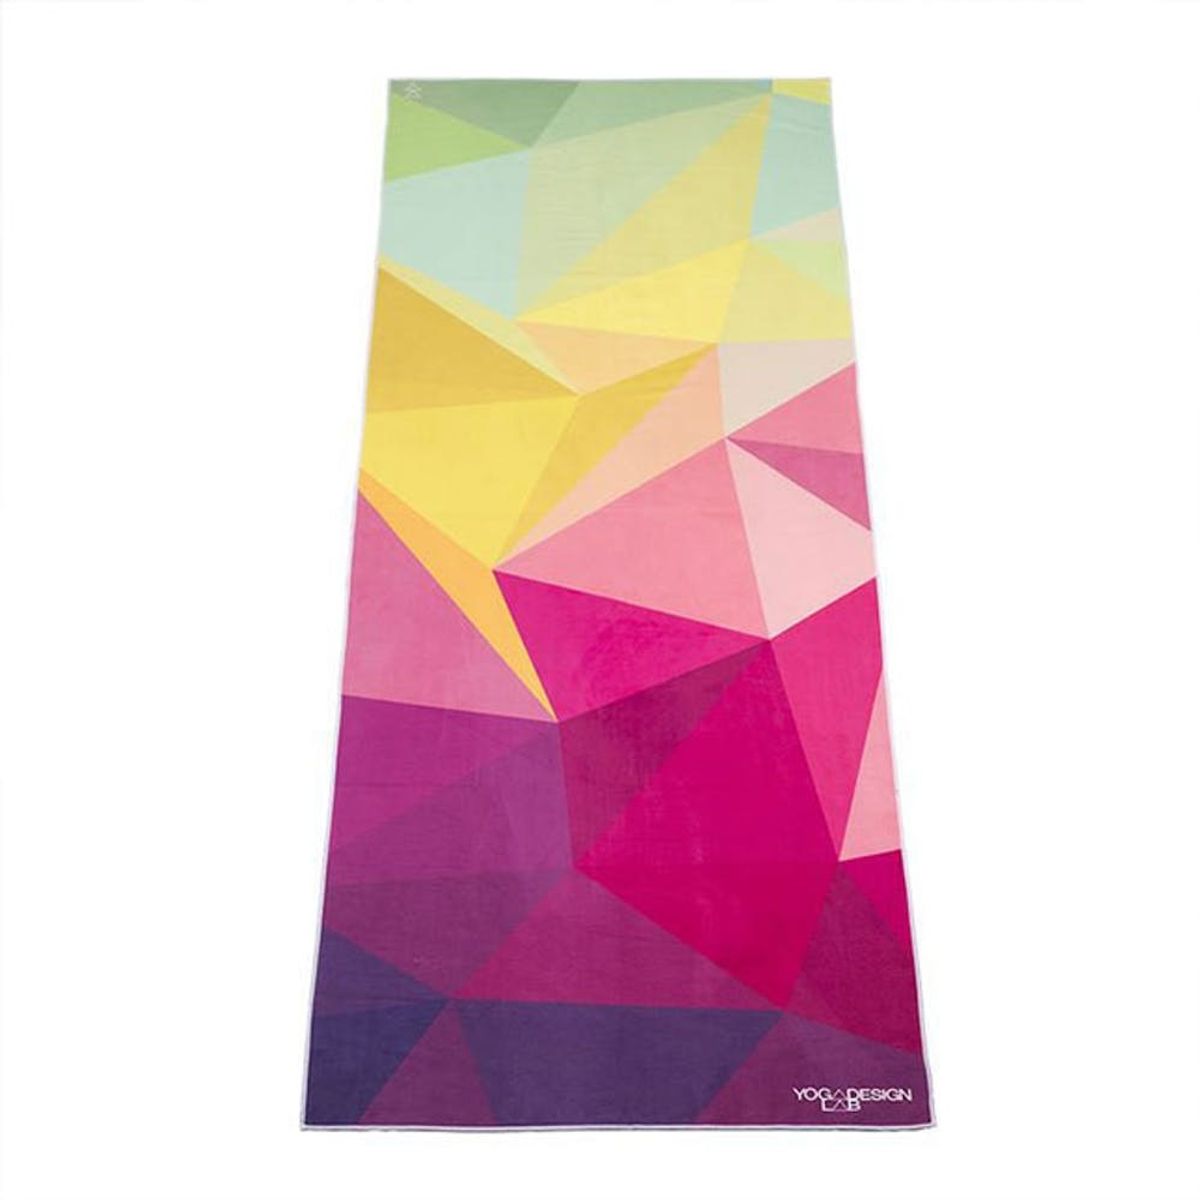 Get Your Namaste On With 11 Colorful Yoga Mats